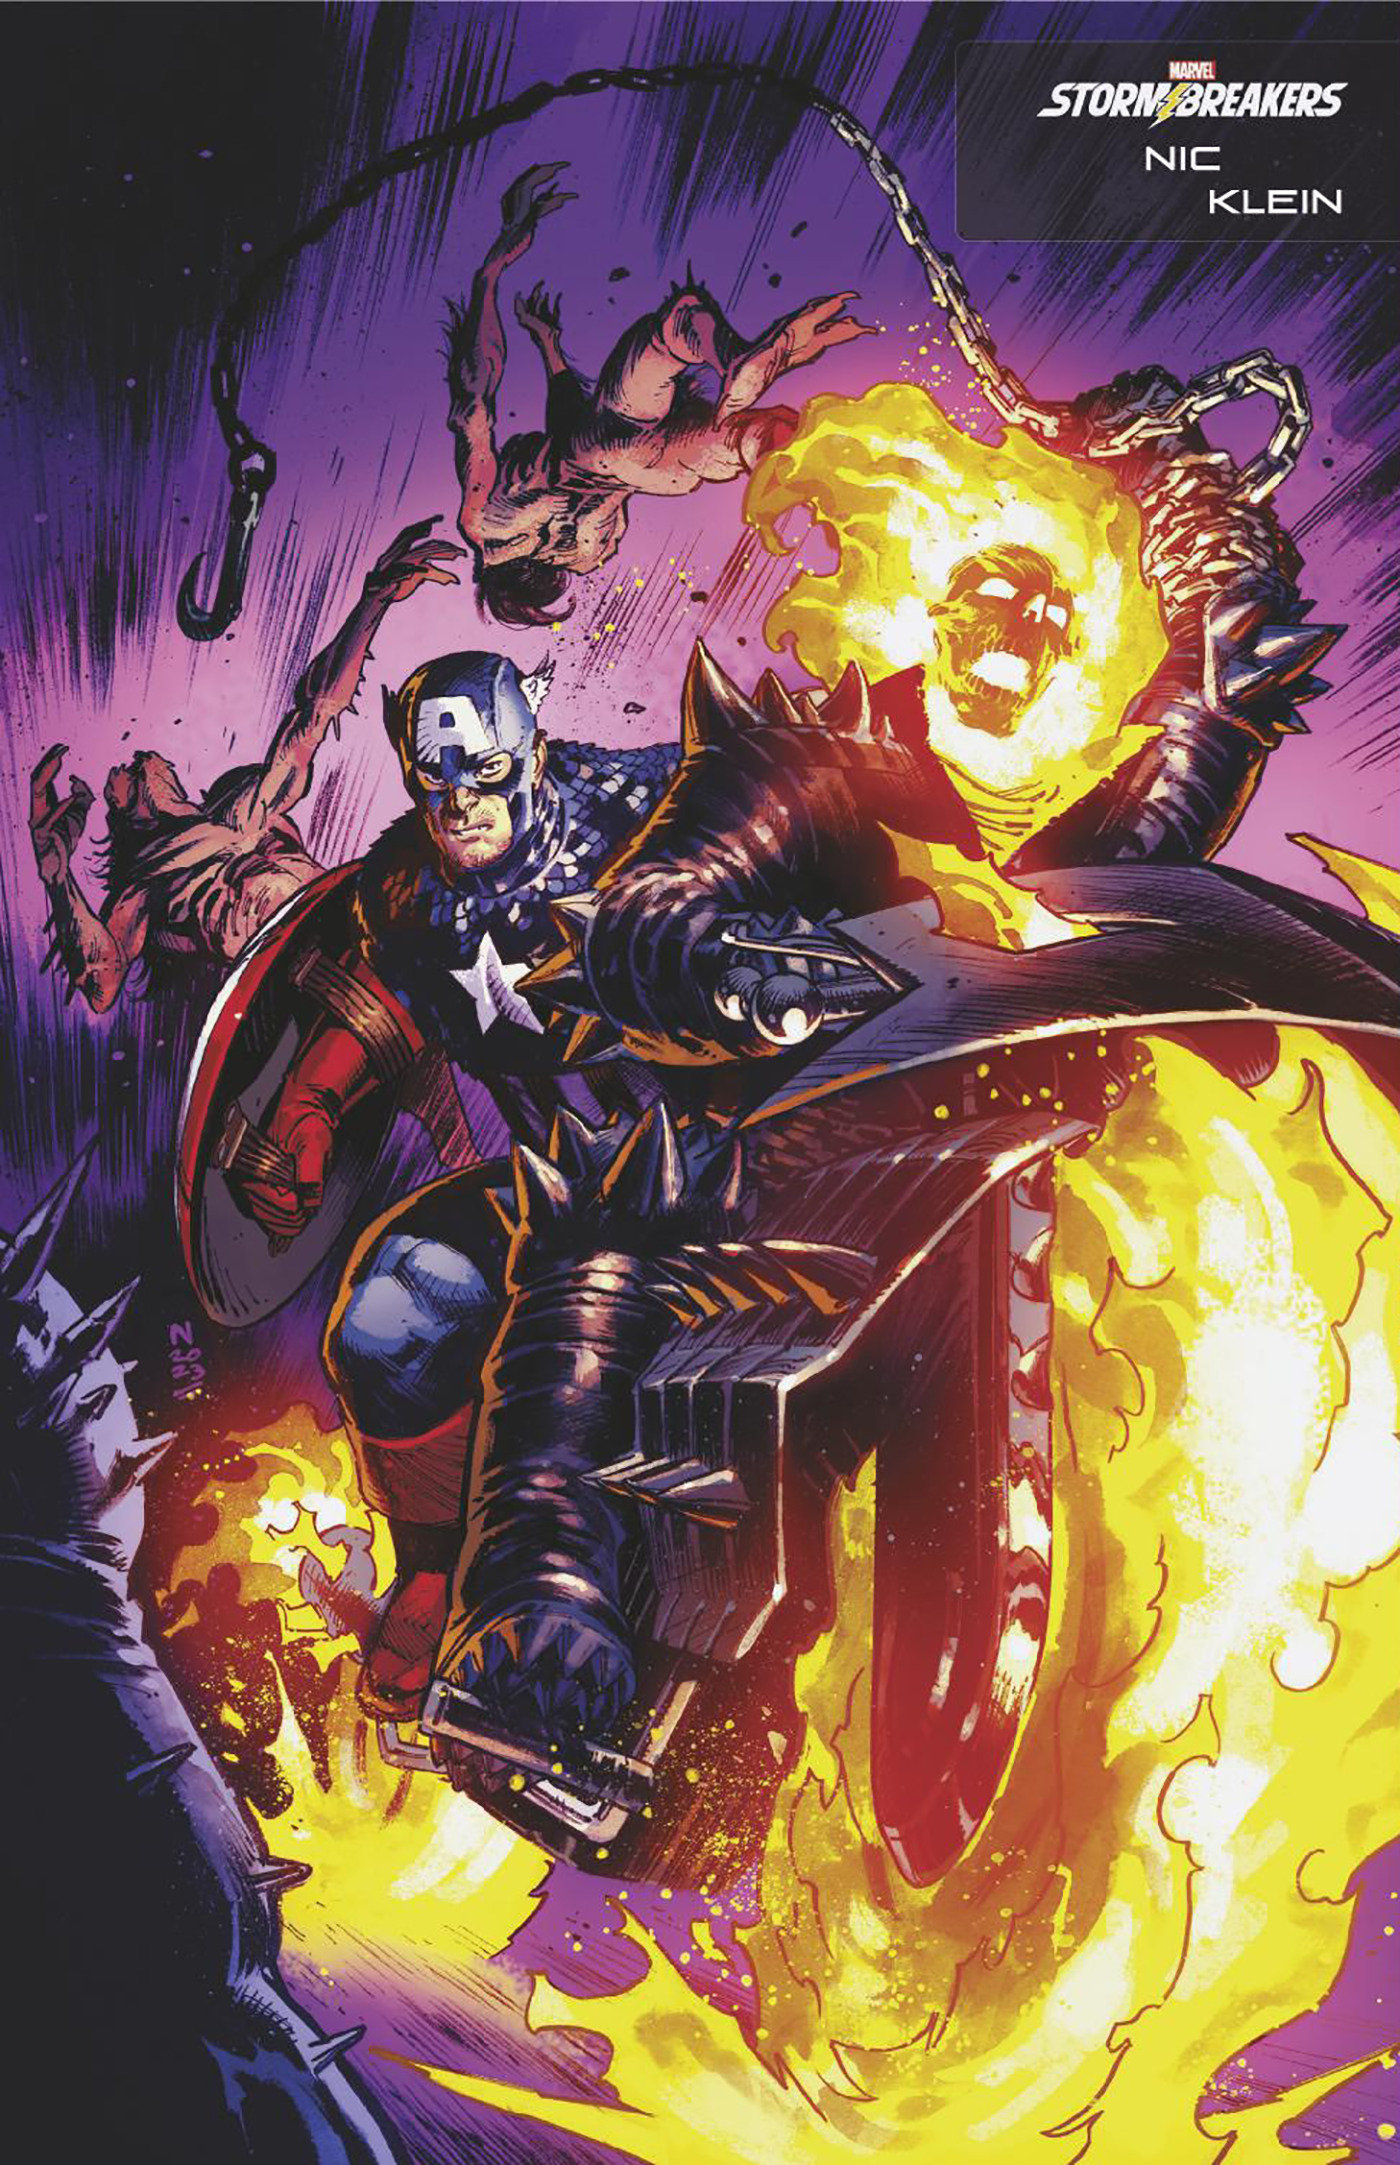 Ghost Rider #18 Nic Klein Stormbreakers Variant